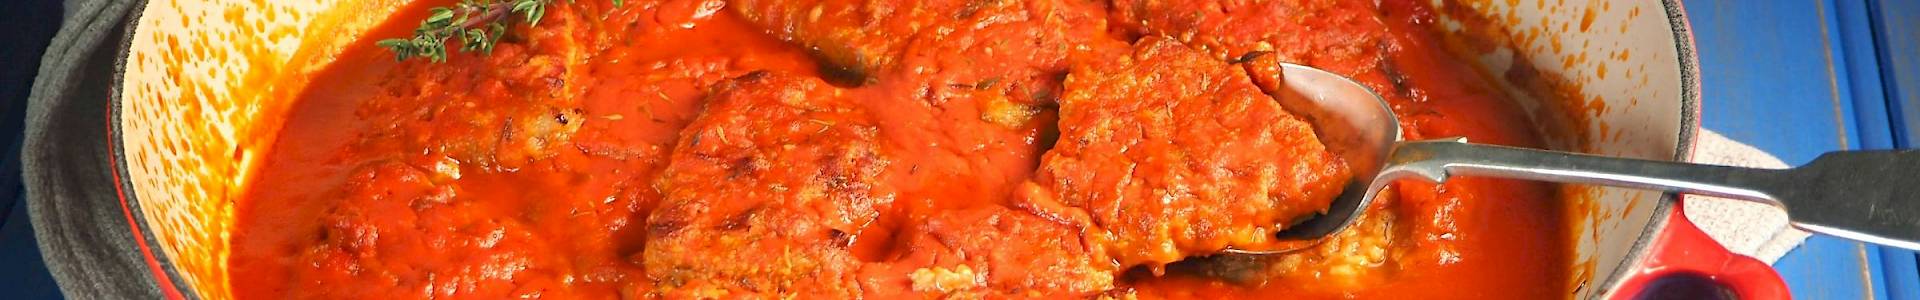 Veal with Tomato and Thyme Sauce